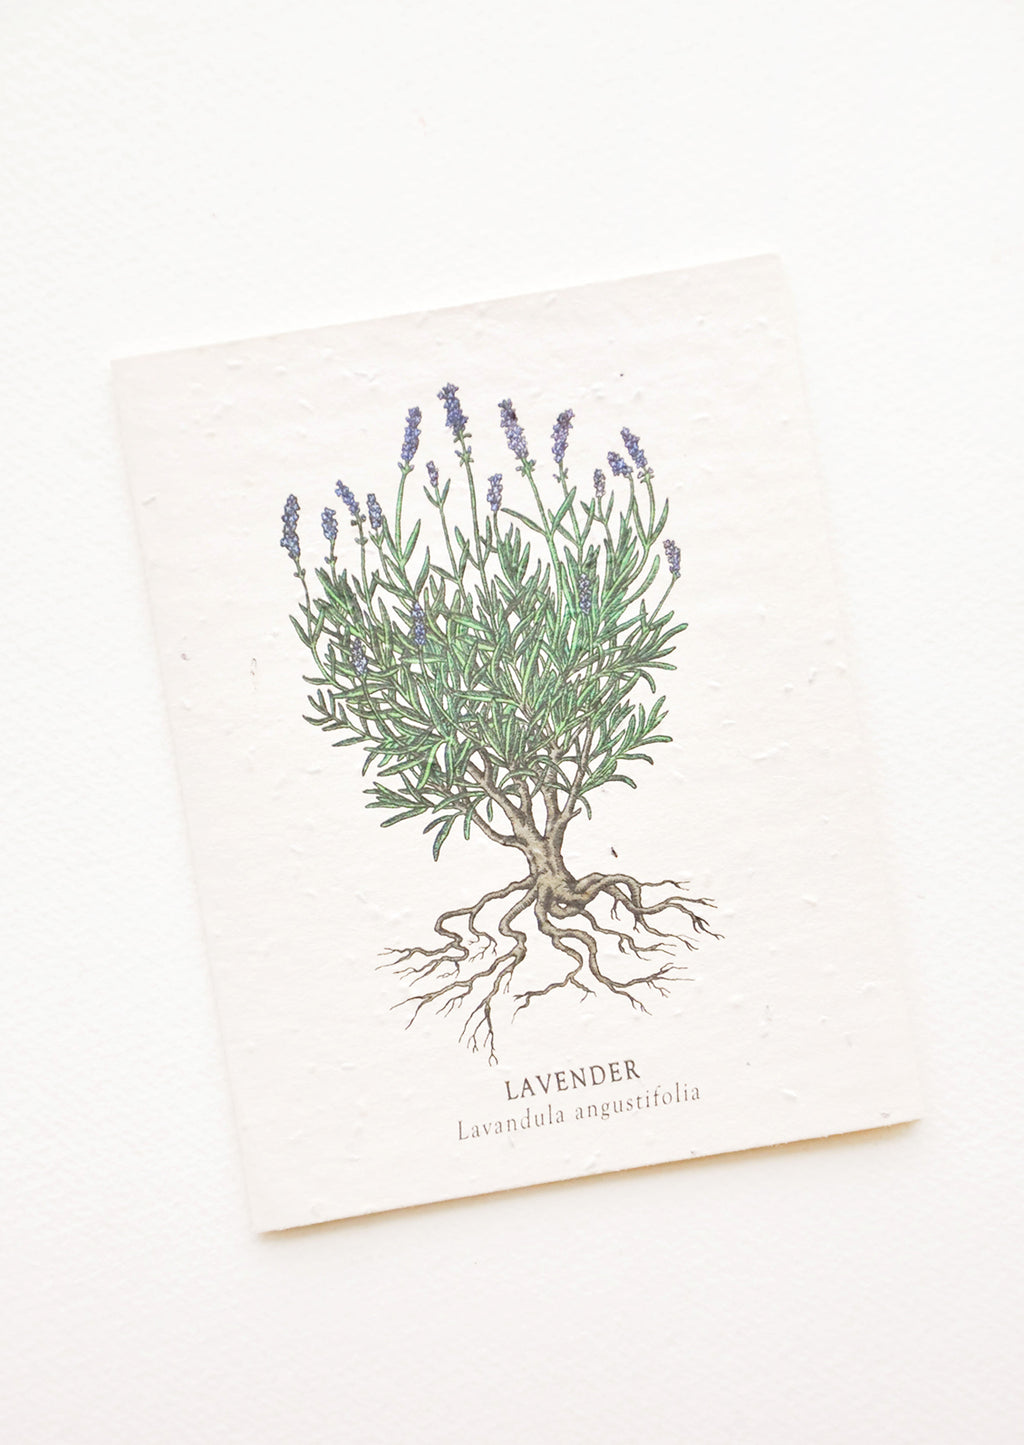 Lavender: Notecard with drawing of a lavender plant.